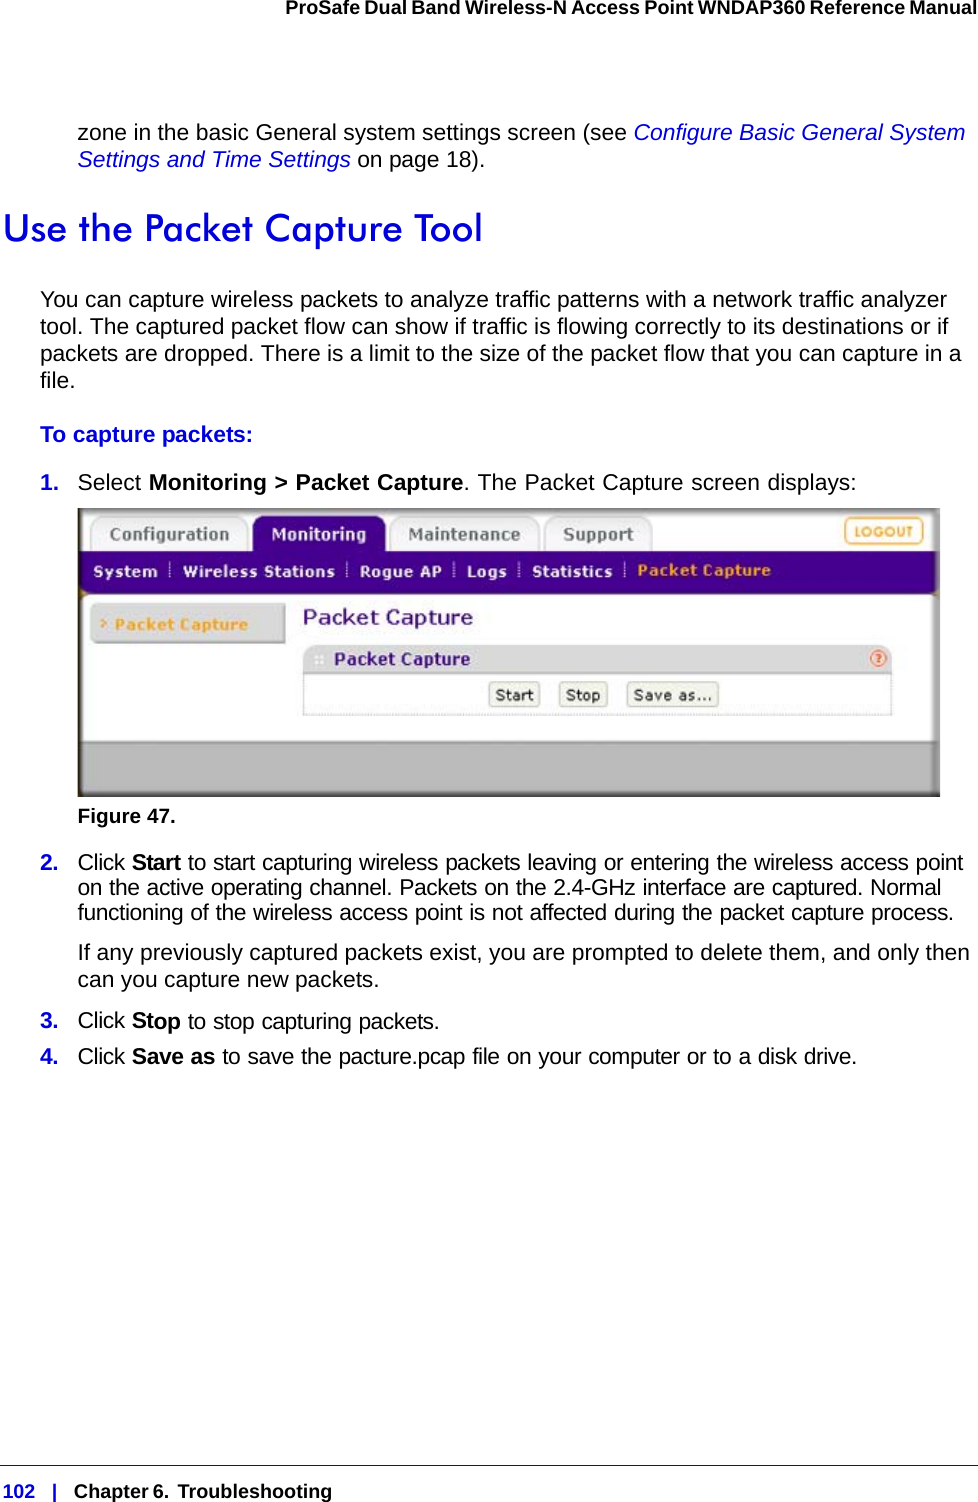 102   |   Chapter 6.  Troubleshooting  ProSafe Dual Band Wireless-N Access Point WNDAP360 Reference Manual zone in the basic General system settings screen (see Configure Basic General System Settings and Time Settings on page 18).Use the Packet Capture ToolYou can capture wireless packets to analyze traffic patterns with a network traffic analyzer tool. The captured packet flow can show if traffic is flowing correctly to its destinations or if packets are dropped. There is a limit to the size of the packet flow that you can capture in a file.To capture packets:1.  Select Monitoring &gt; Packet Capture. The Packet Capture screen displays:Figure 47.  2.  Click Start to start capturing wireless packets leaving or entering the wireless access point on the active operating channel. Packets on the 2.4-GHz interface are captured. Normal functioning of the wireless access point is not affected during the packet capture process.If any previously captured packets exist, you are prompted to delete them, and only then can you capture new packets.3.  Click Stop to stop capturing packets.4.  Click Save as to save the pacture.pcap file on your computer or to a disk drive.